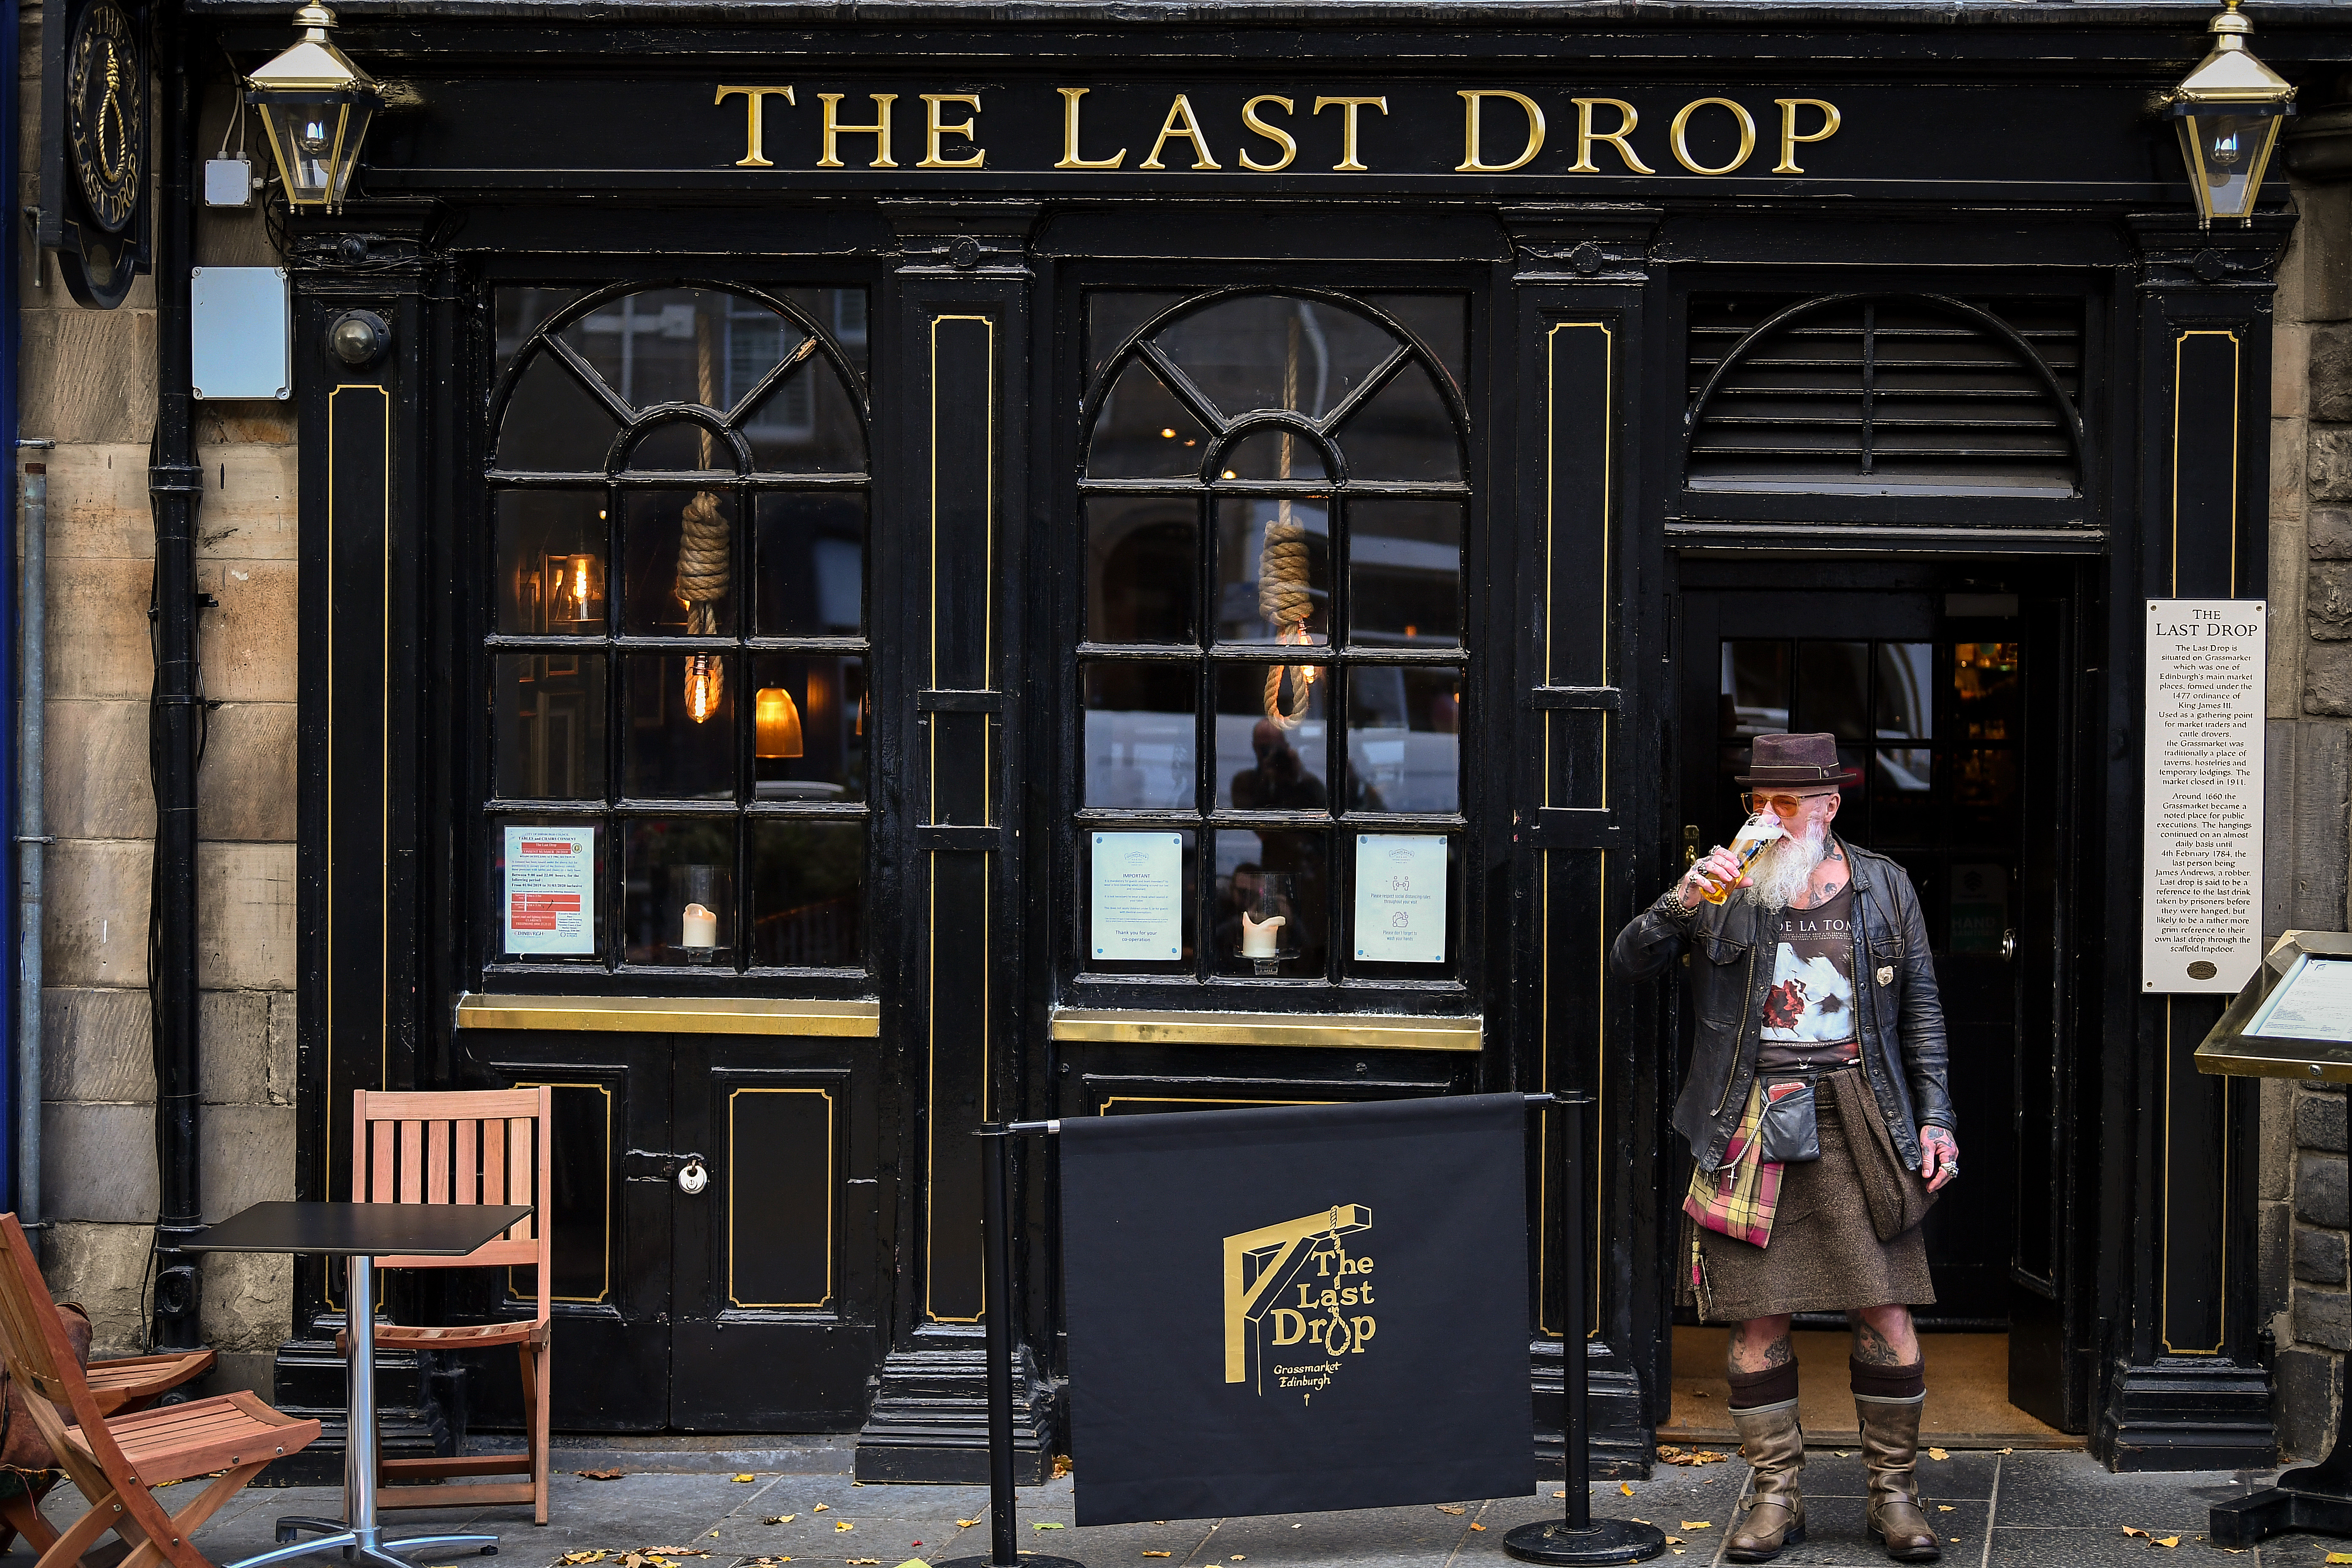 A History Of Tavern Names And Their Clever Wordplay | History Daily